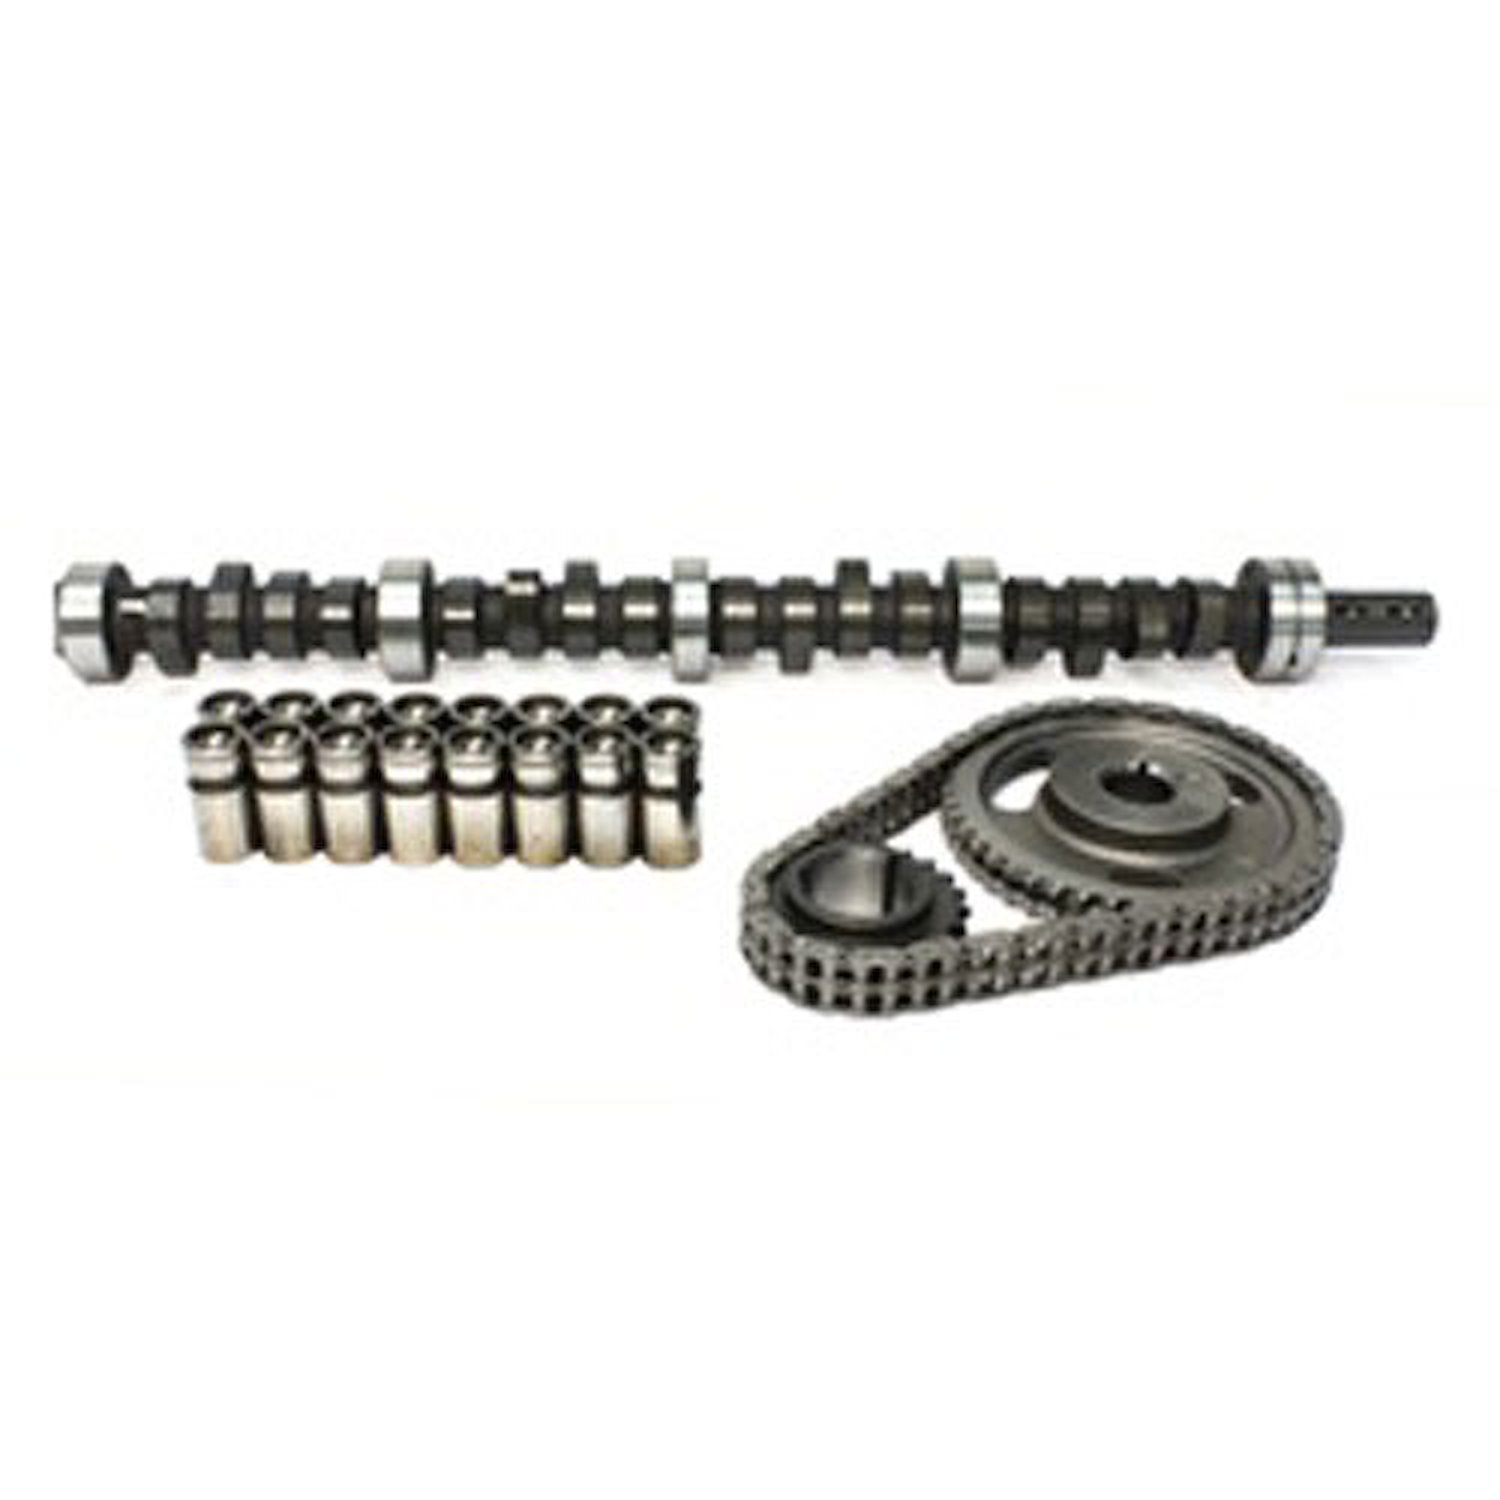 High Energy 268H Hydraulic Flat Tappet Camshaft Small Kit Lift: .456" /.456" Duration: 268°/268° RPM Range: 1500-5500